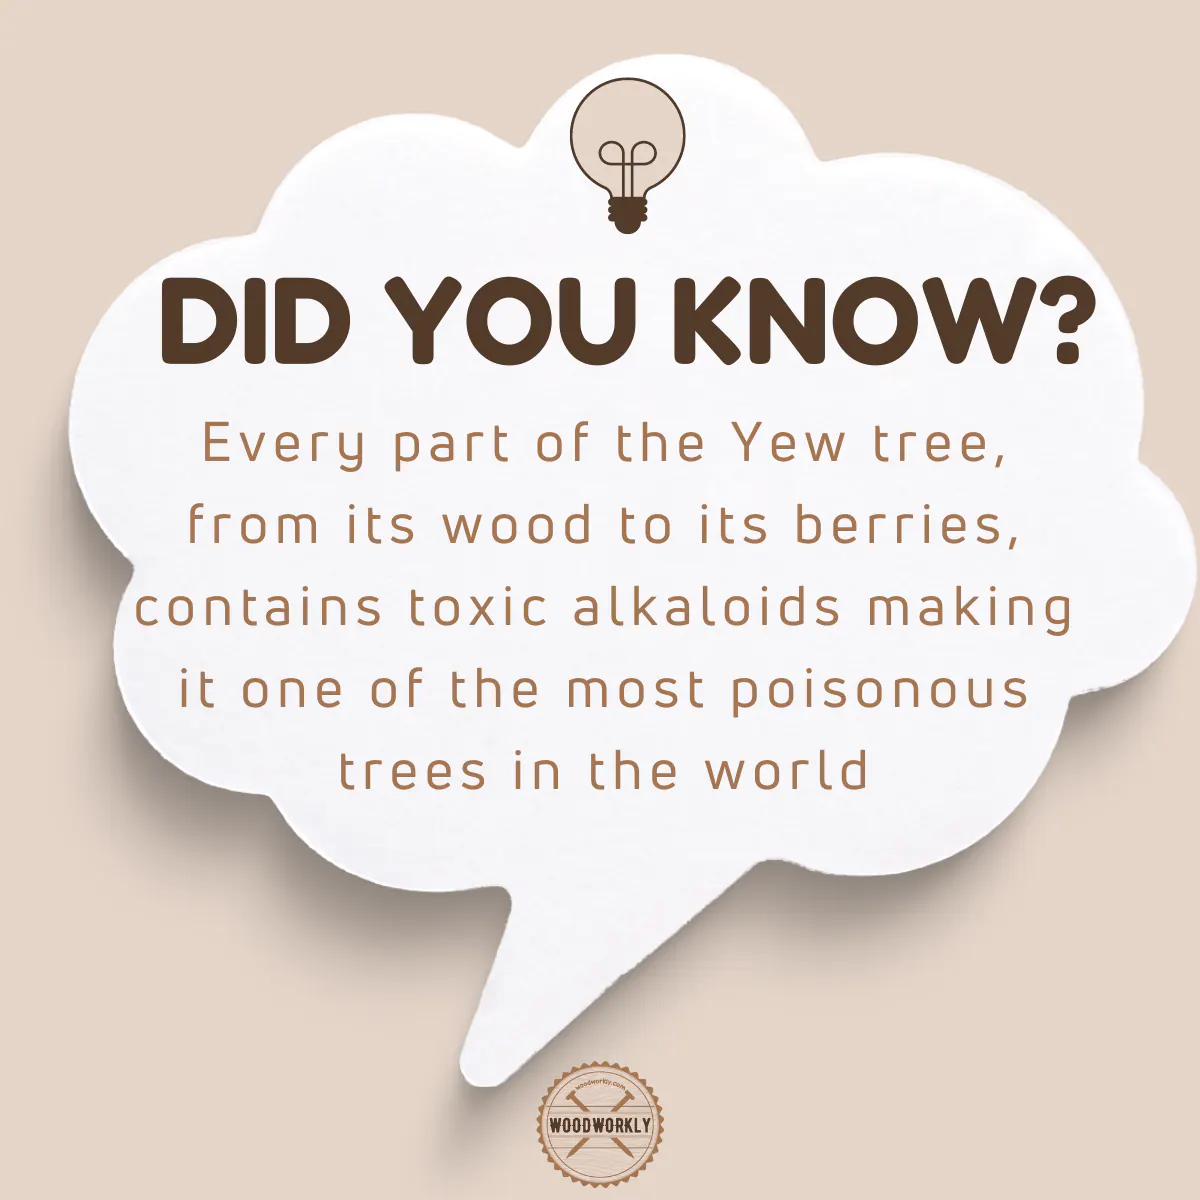 Did you know fact about Yew wood